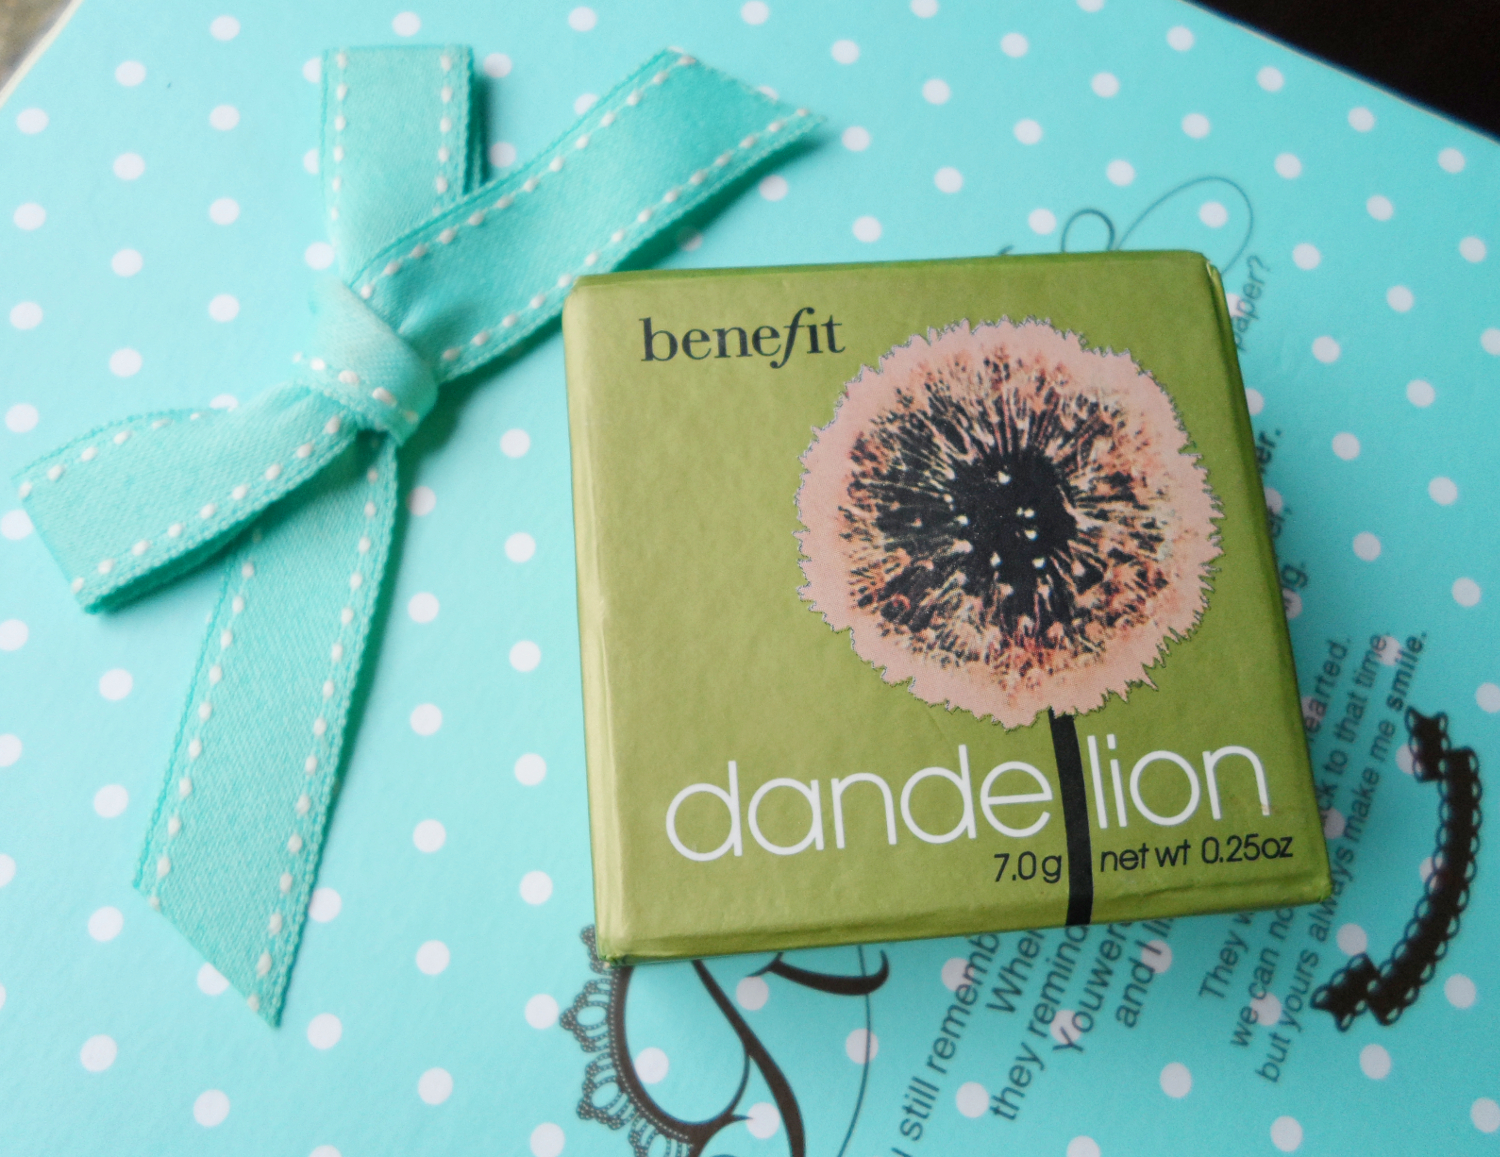 benefit cosmetics blush dandelion review and swatches